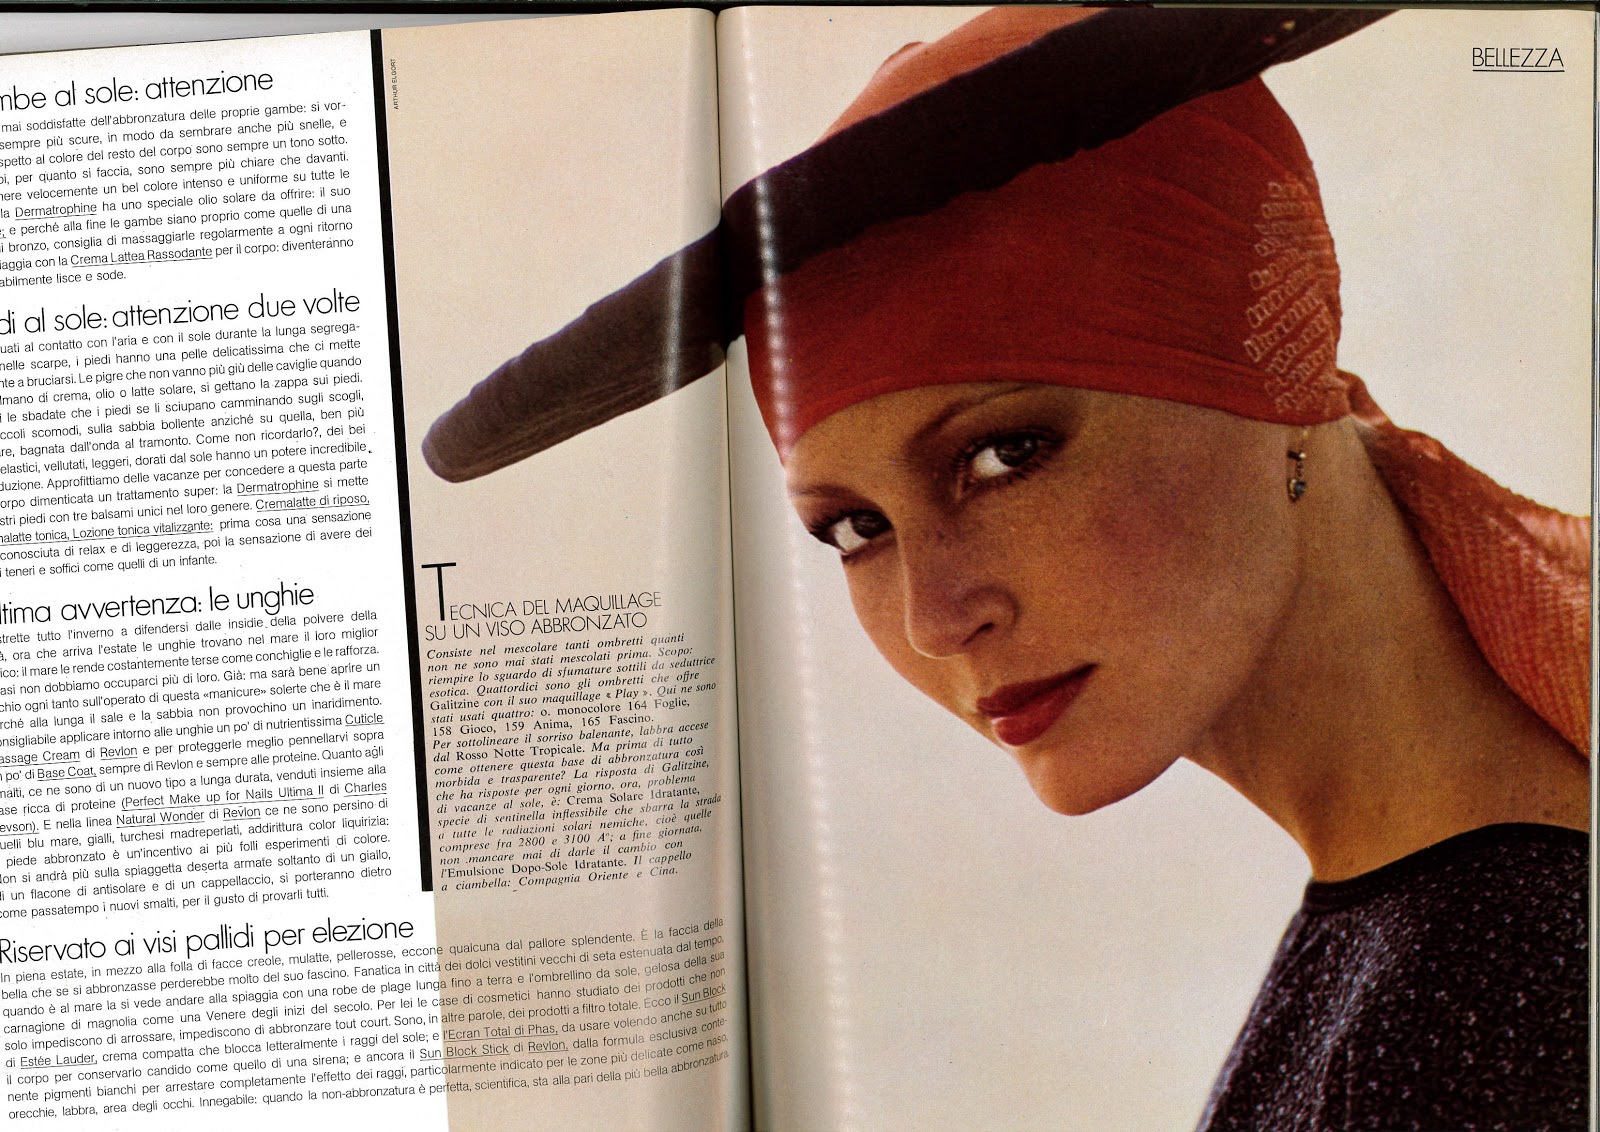 youthquakers: July 1974 - Vogue Italia